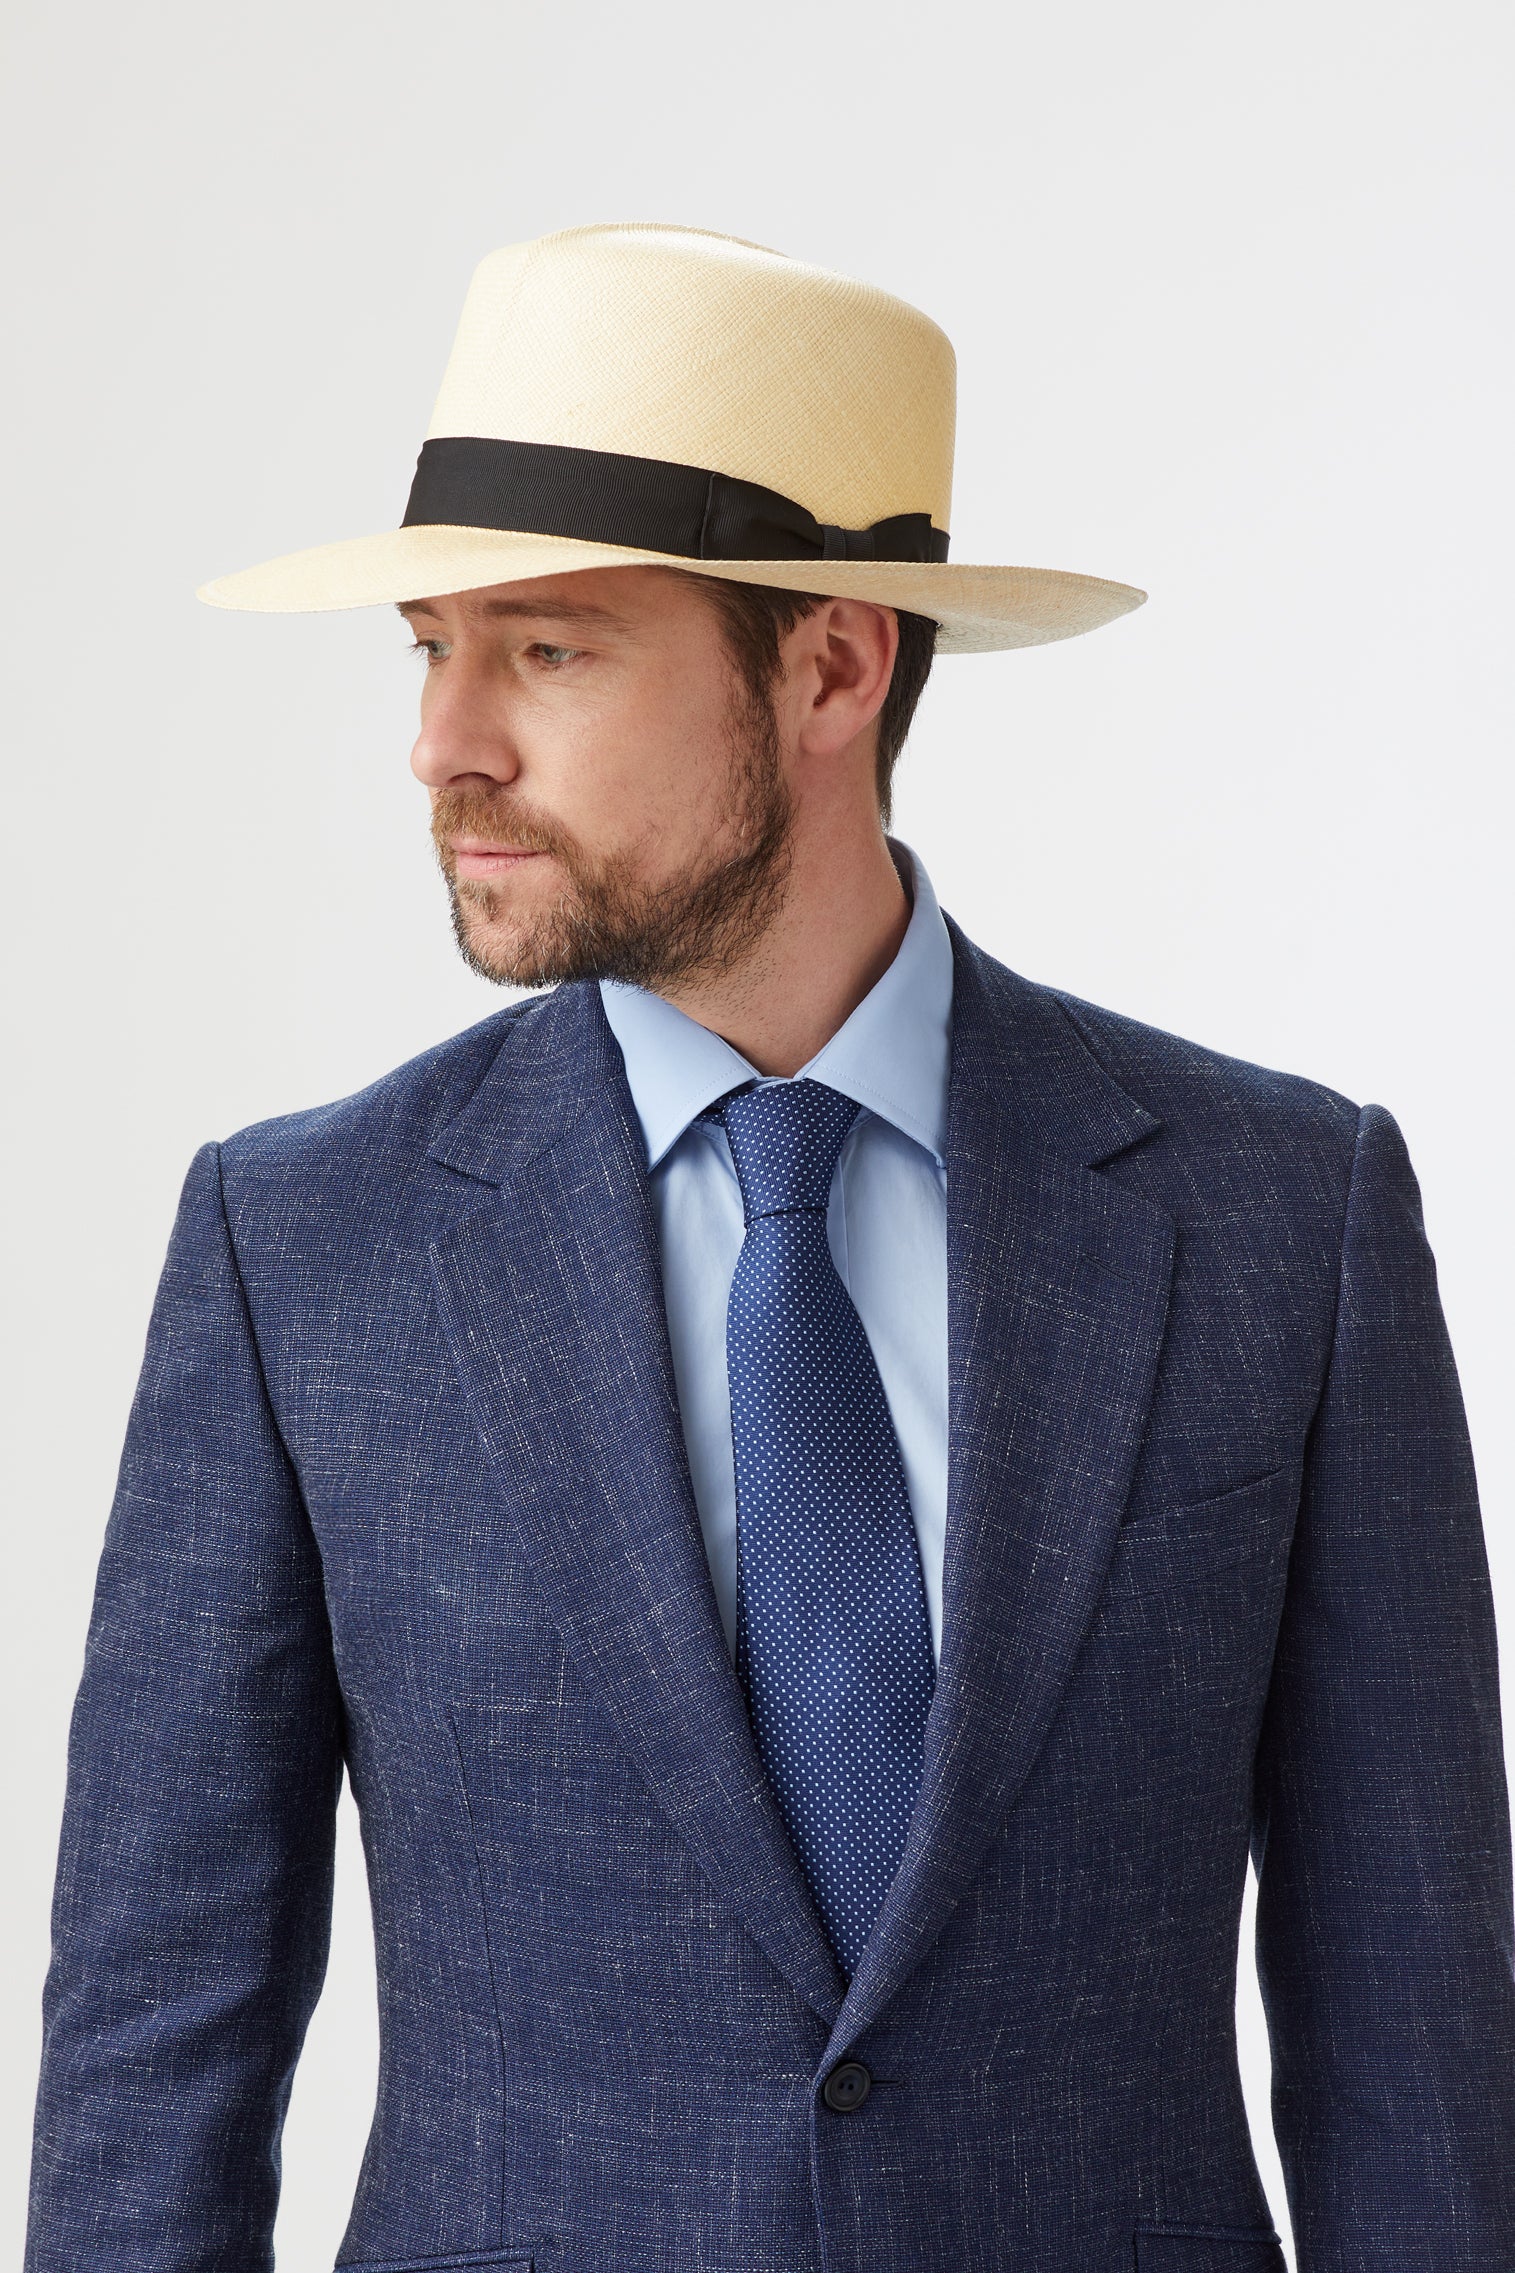 Men's Rollable Panama - Valentines Day Gift Ideas - Lock & Co. Hatters London UK